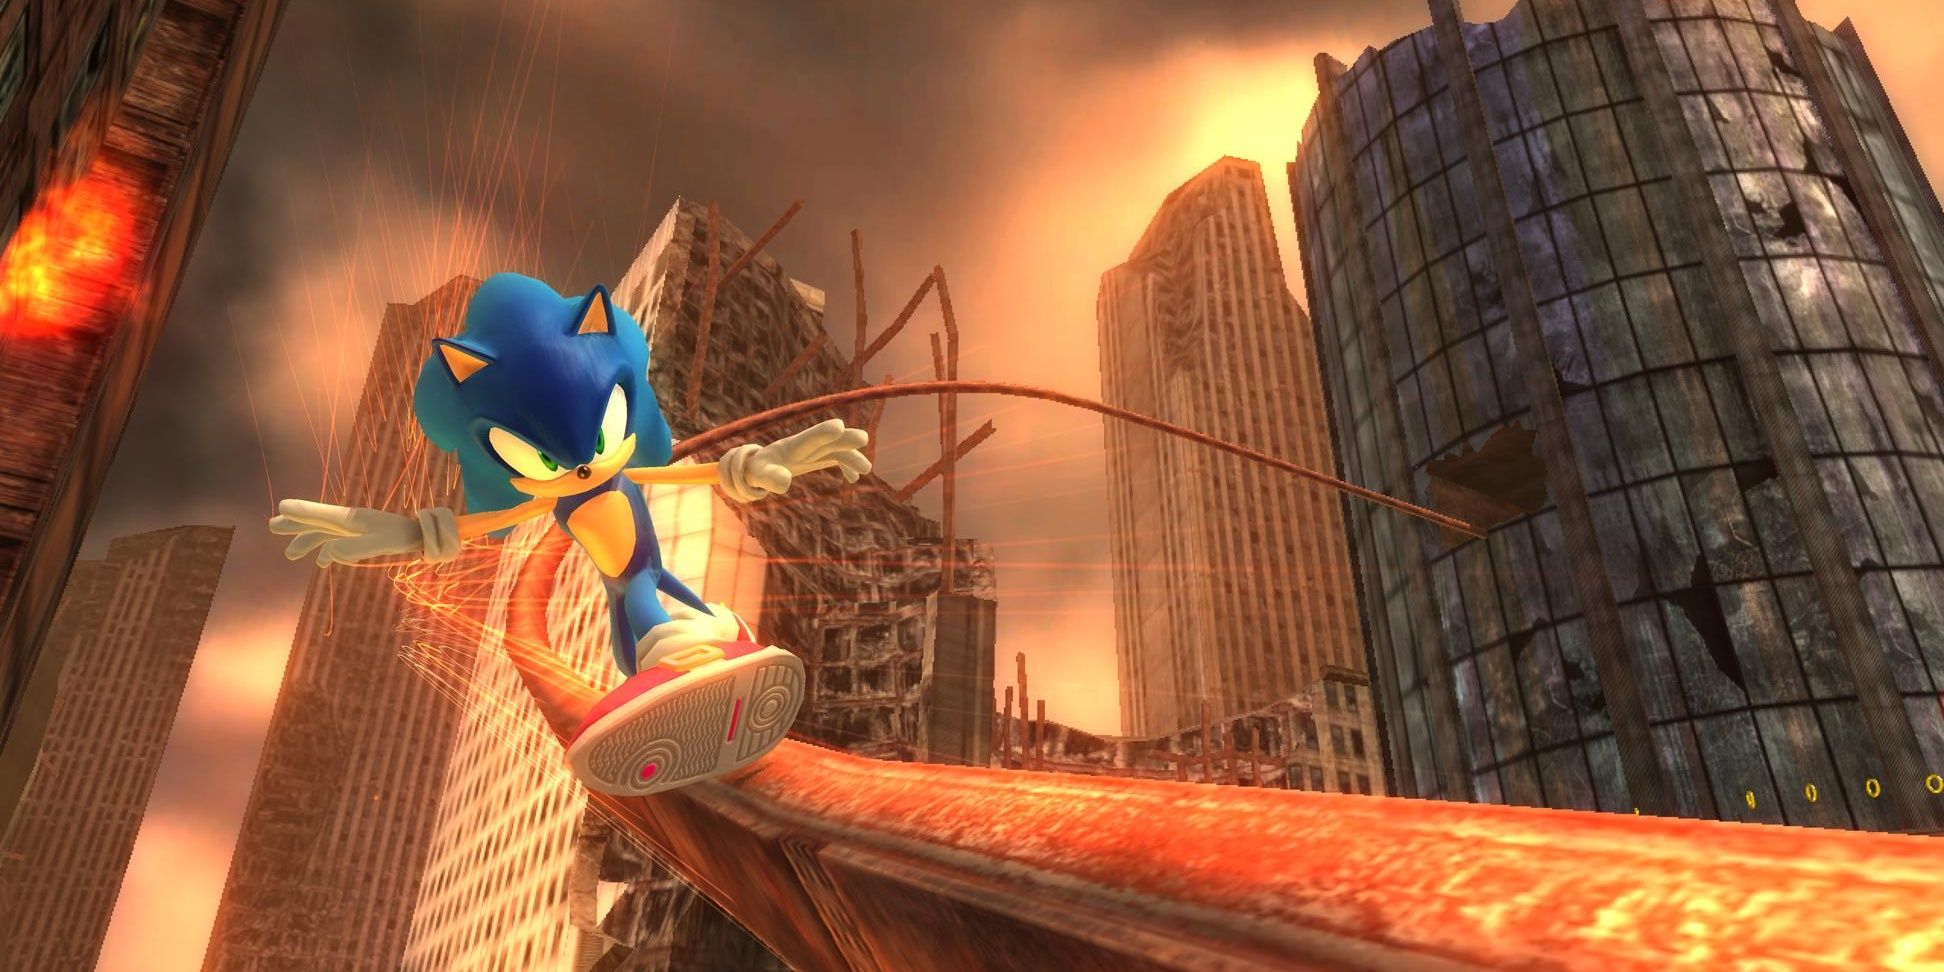 Sonic Grinding On A Rail In Crisis City From Sonic The Hedgehog (2006)